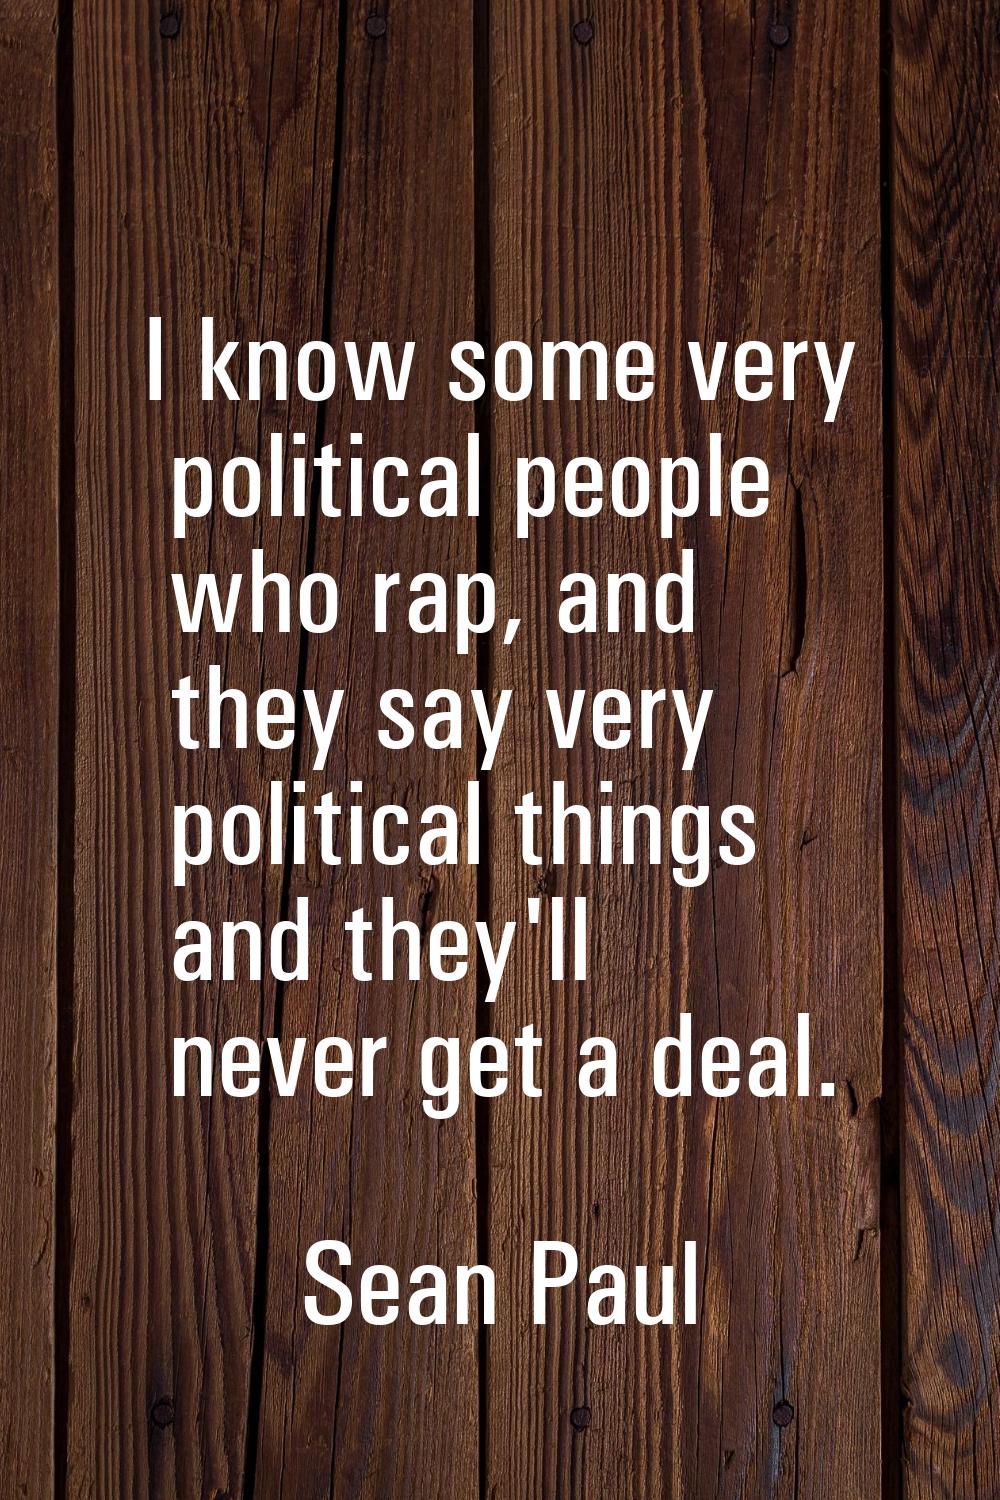 I know some very political people who rap, and they say very political things and they'll never get